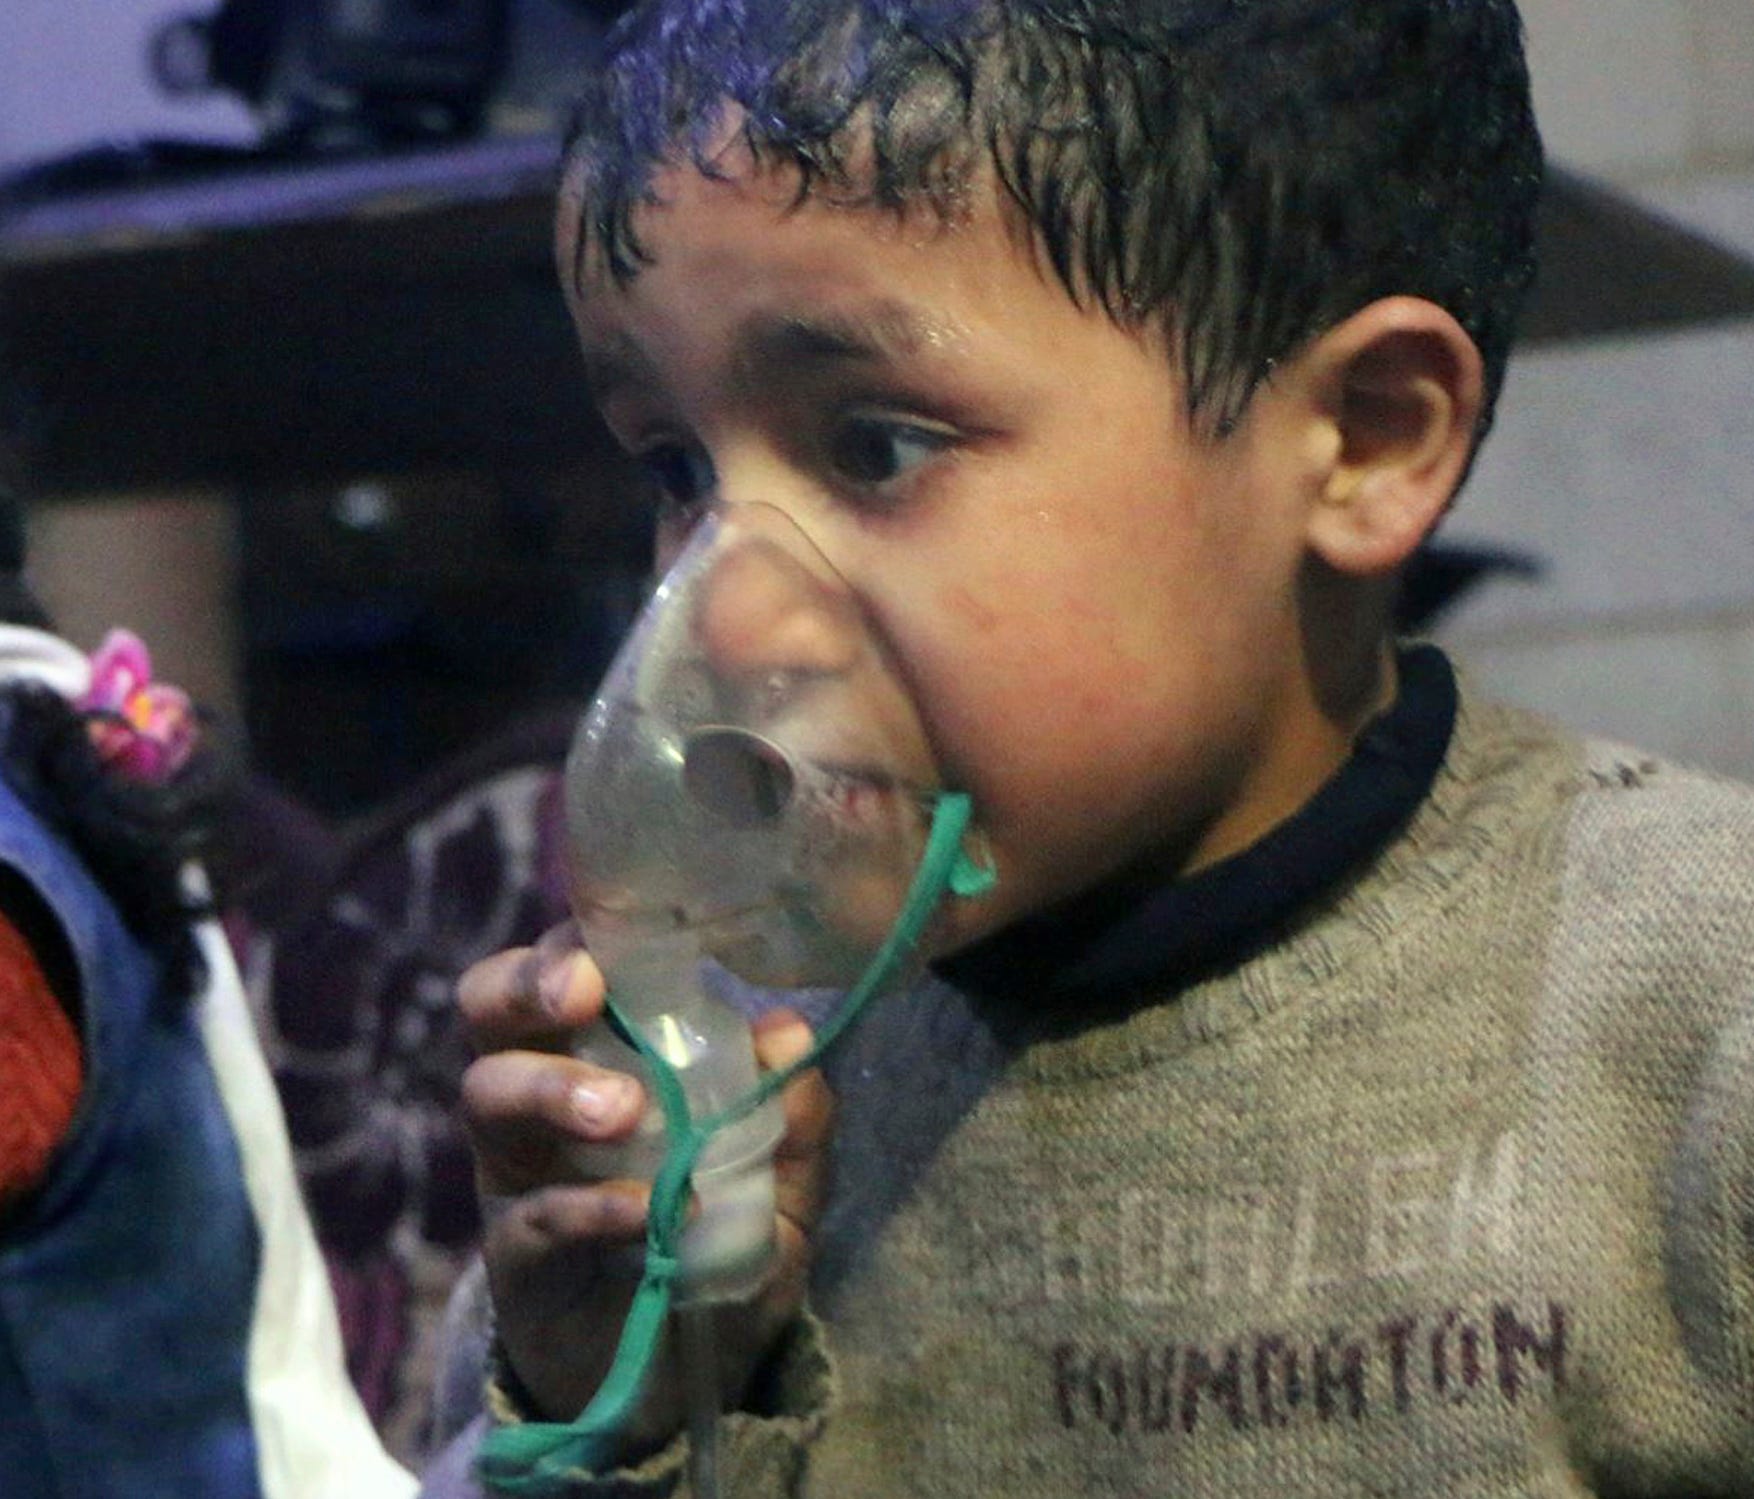 This image released early April 8, 2018 by the Syrian Civil Defense White Helmets, shows a child receiving oxygen through respirators following an alleged poison gas attack in the rebel-held town of Douma, near Damascus, Syria. Syrian rescuers and me